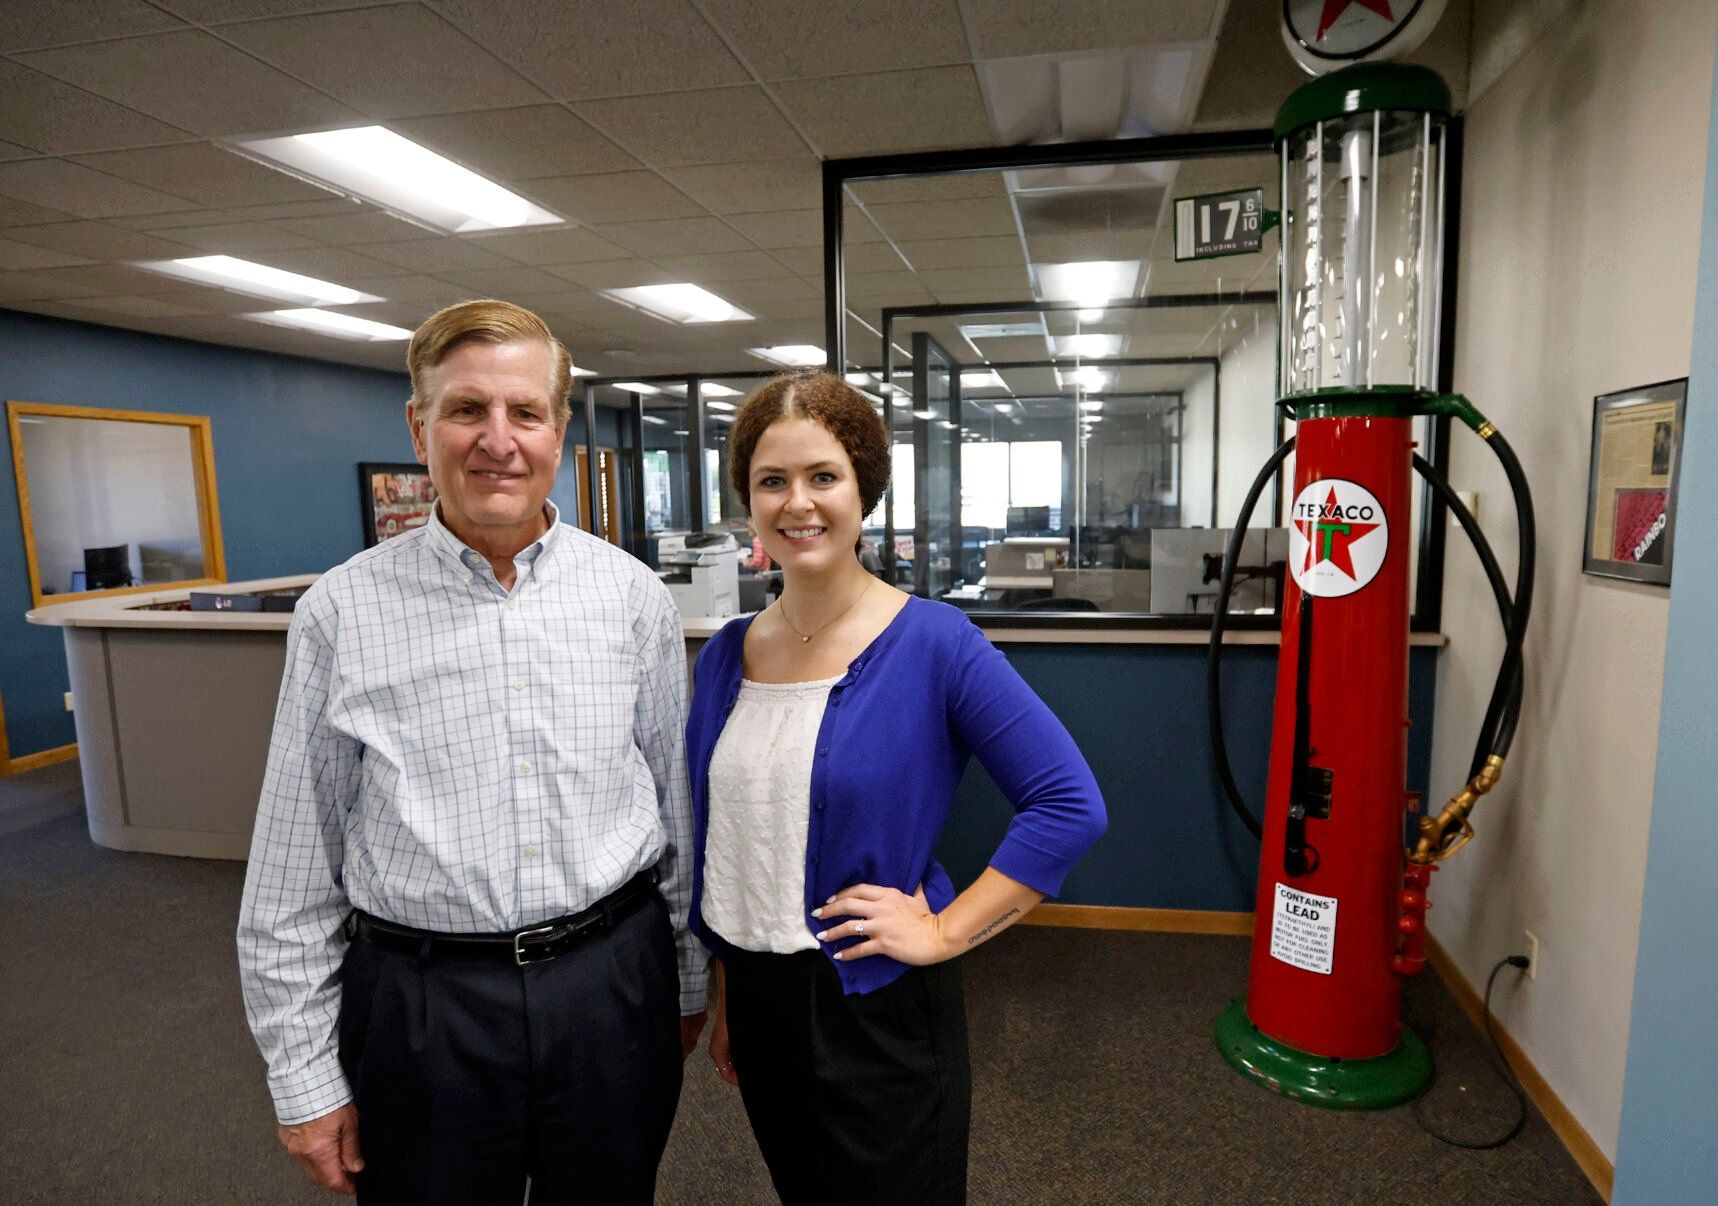 Paul Fahey (left), president and owner at Rainbo Oil Co., and Tessa Fahey, operations development.    PHOTO CREDIT: JESSICA REILLY
Telegraph Herald